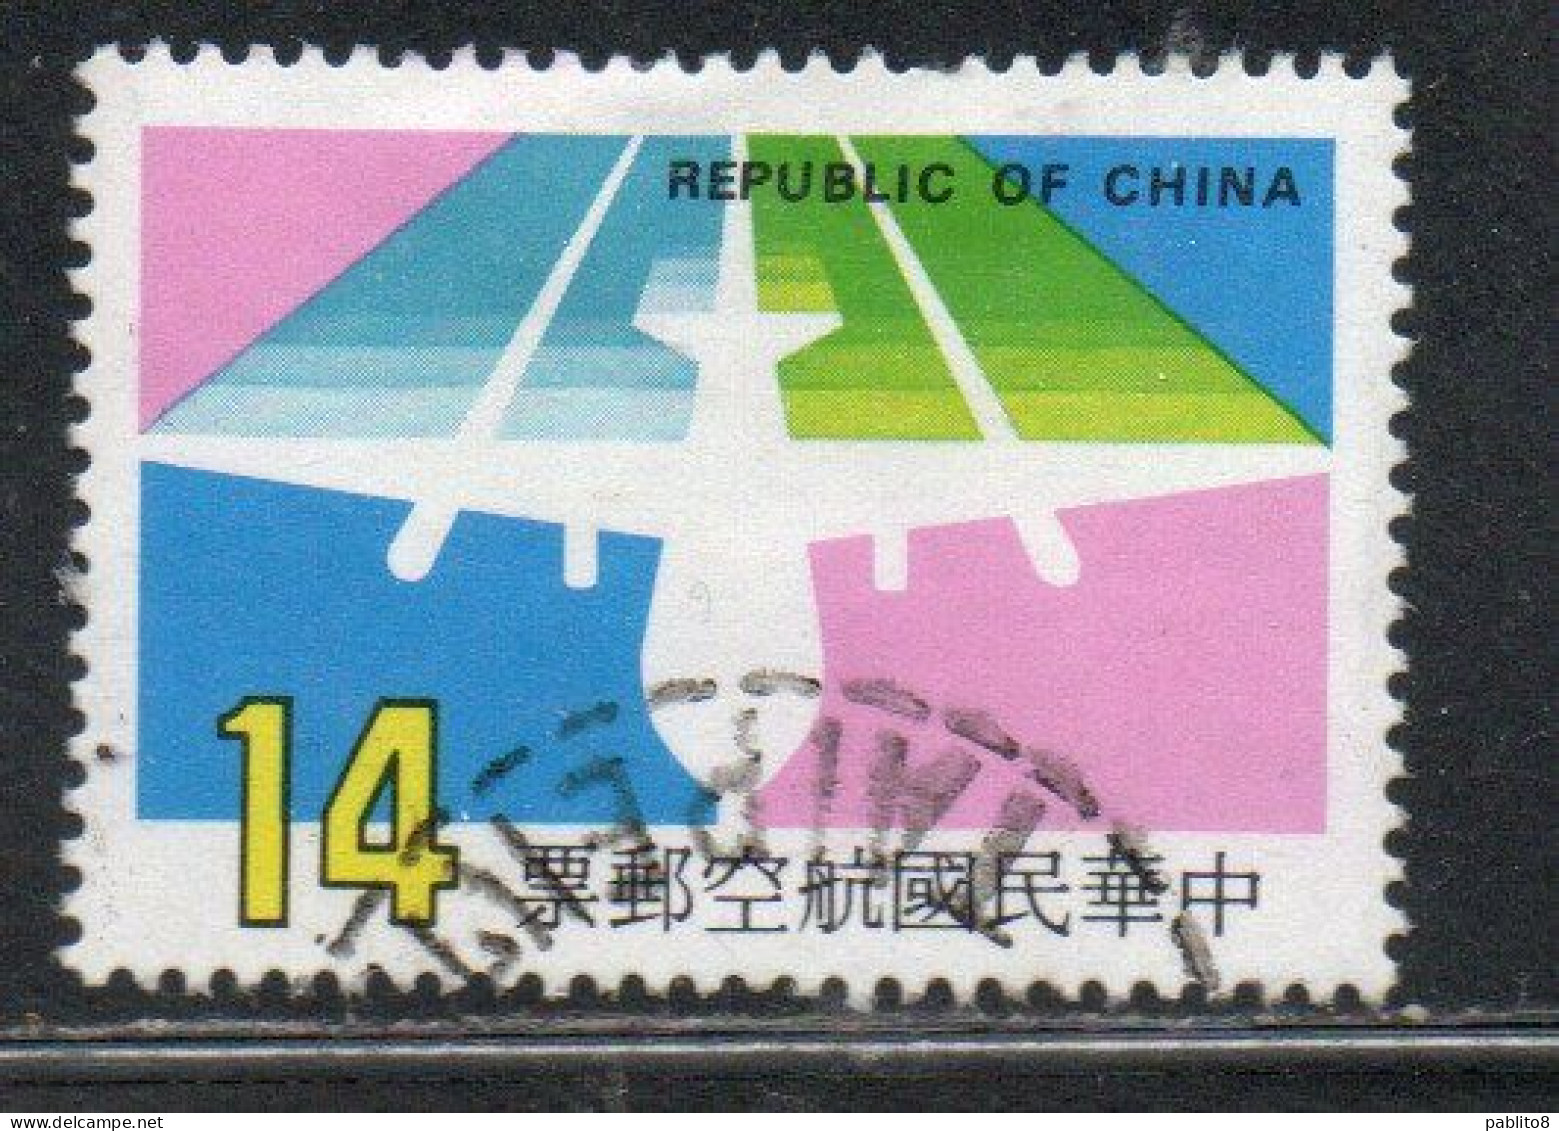 CHINA REPUBLIC CINA TAIWAN FORMOSA 1987 AIR POST MAIL AIRMAIL AIRPLANE 14$ USED USATO OBLITERE' - Airmail